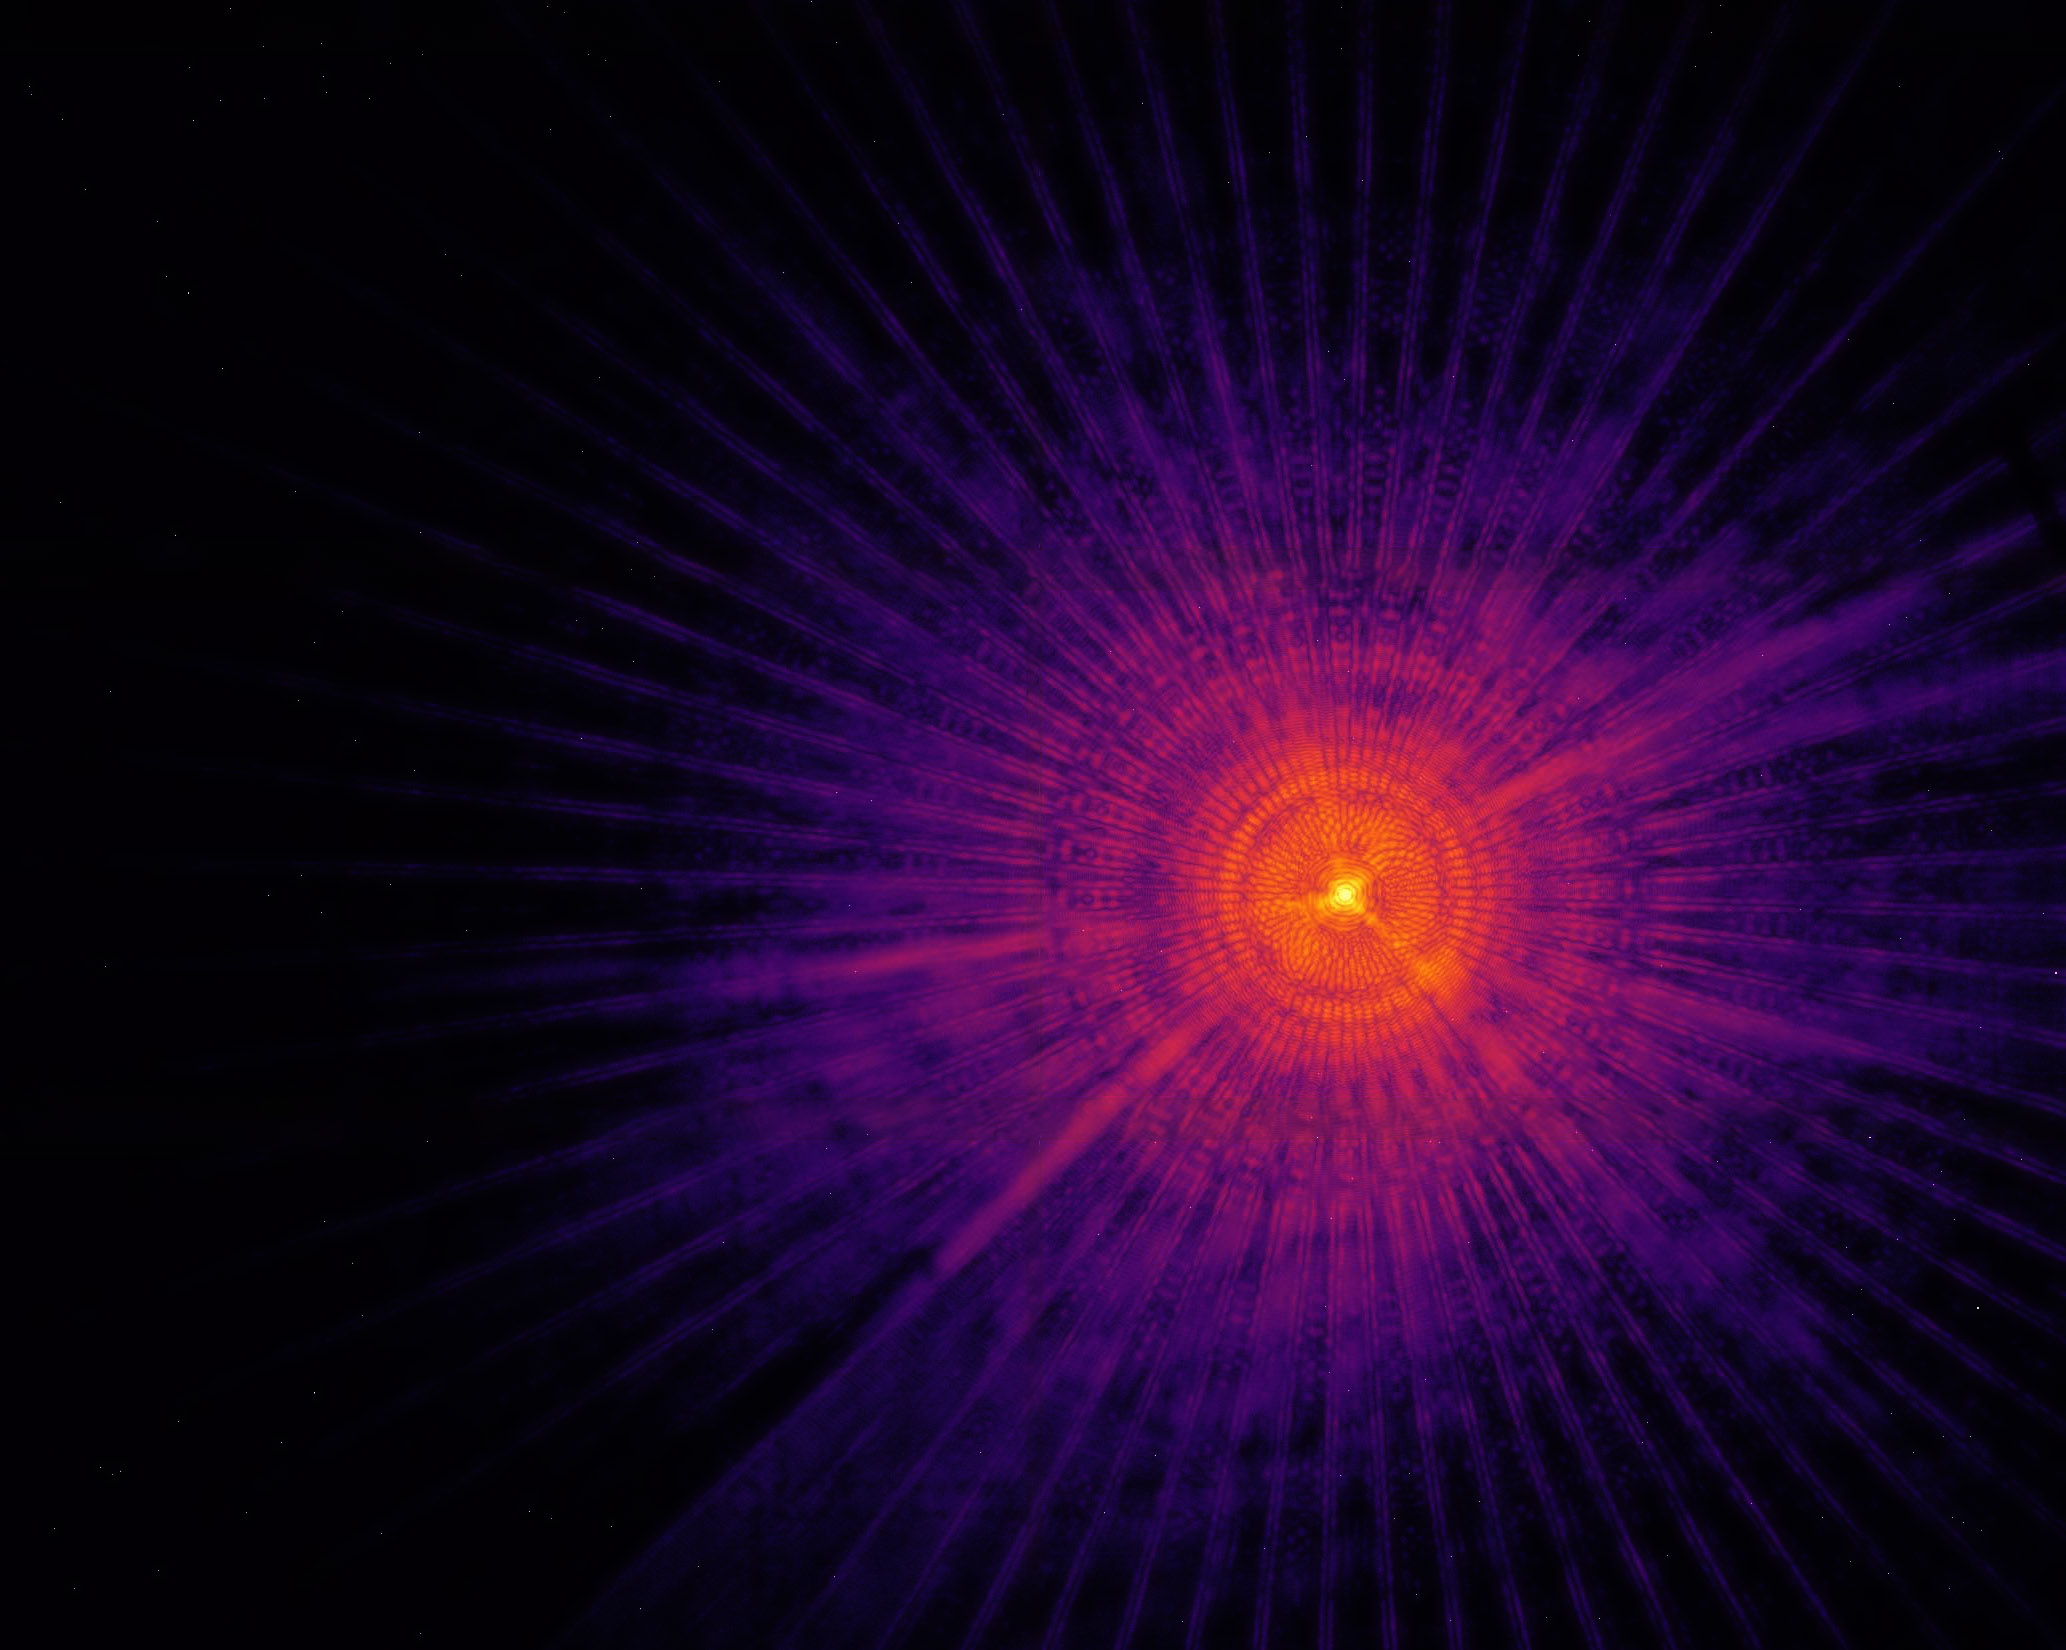 Diffraction pattern recorded during ptychographic scans using the Siemens star test sample